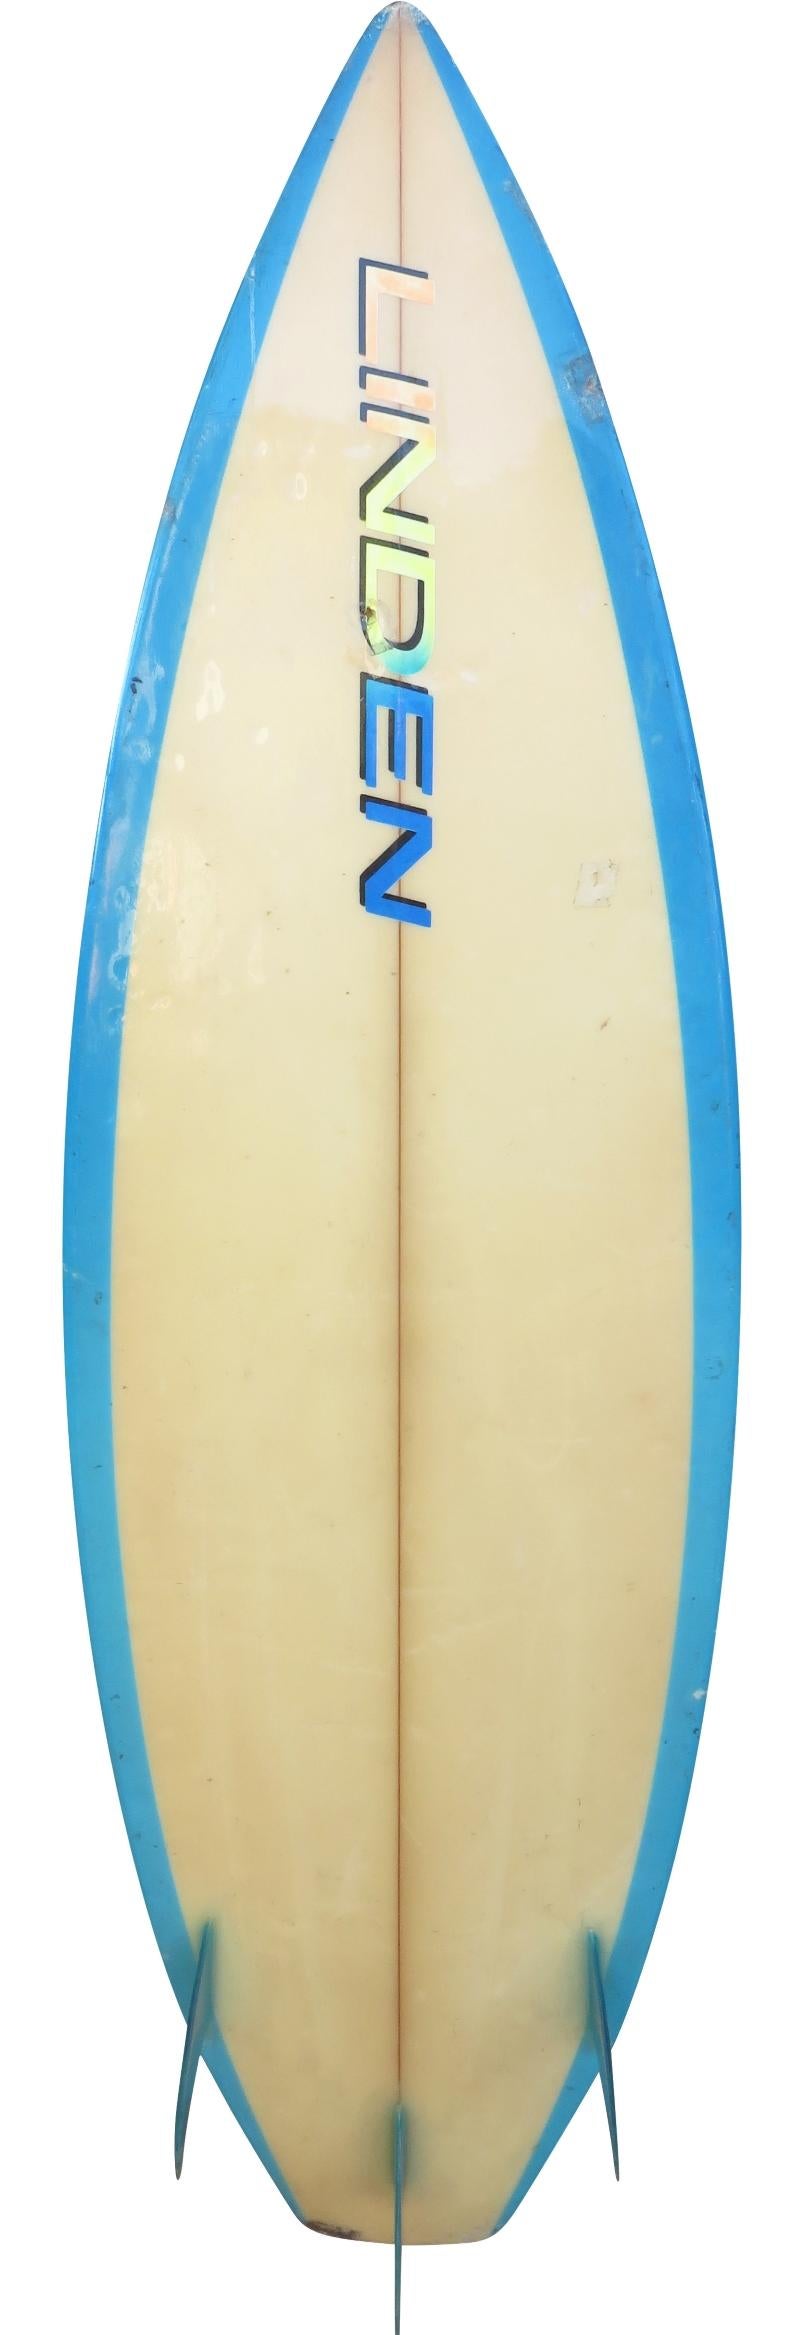 1980s vintage linden surfboards thruster (tri-fin) shortboard. Features a multi-ray design on deck with channel bottom and blue airbrushed rails. A great example of a 1980s surfboard.